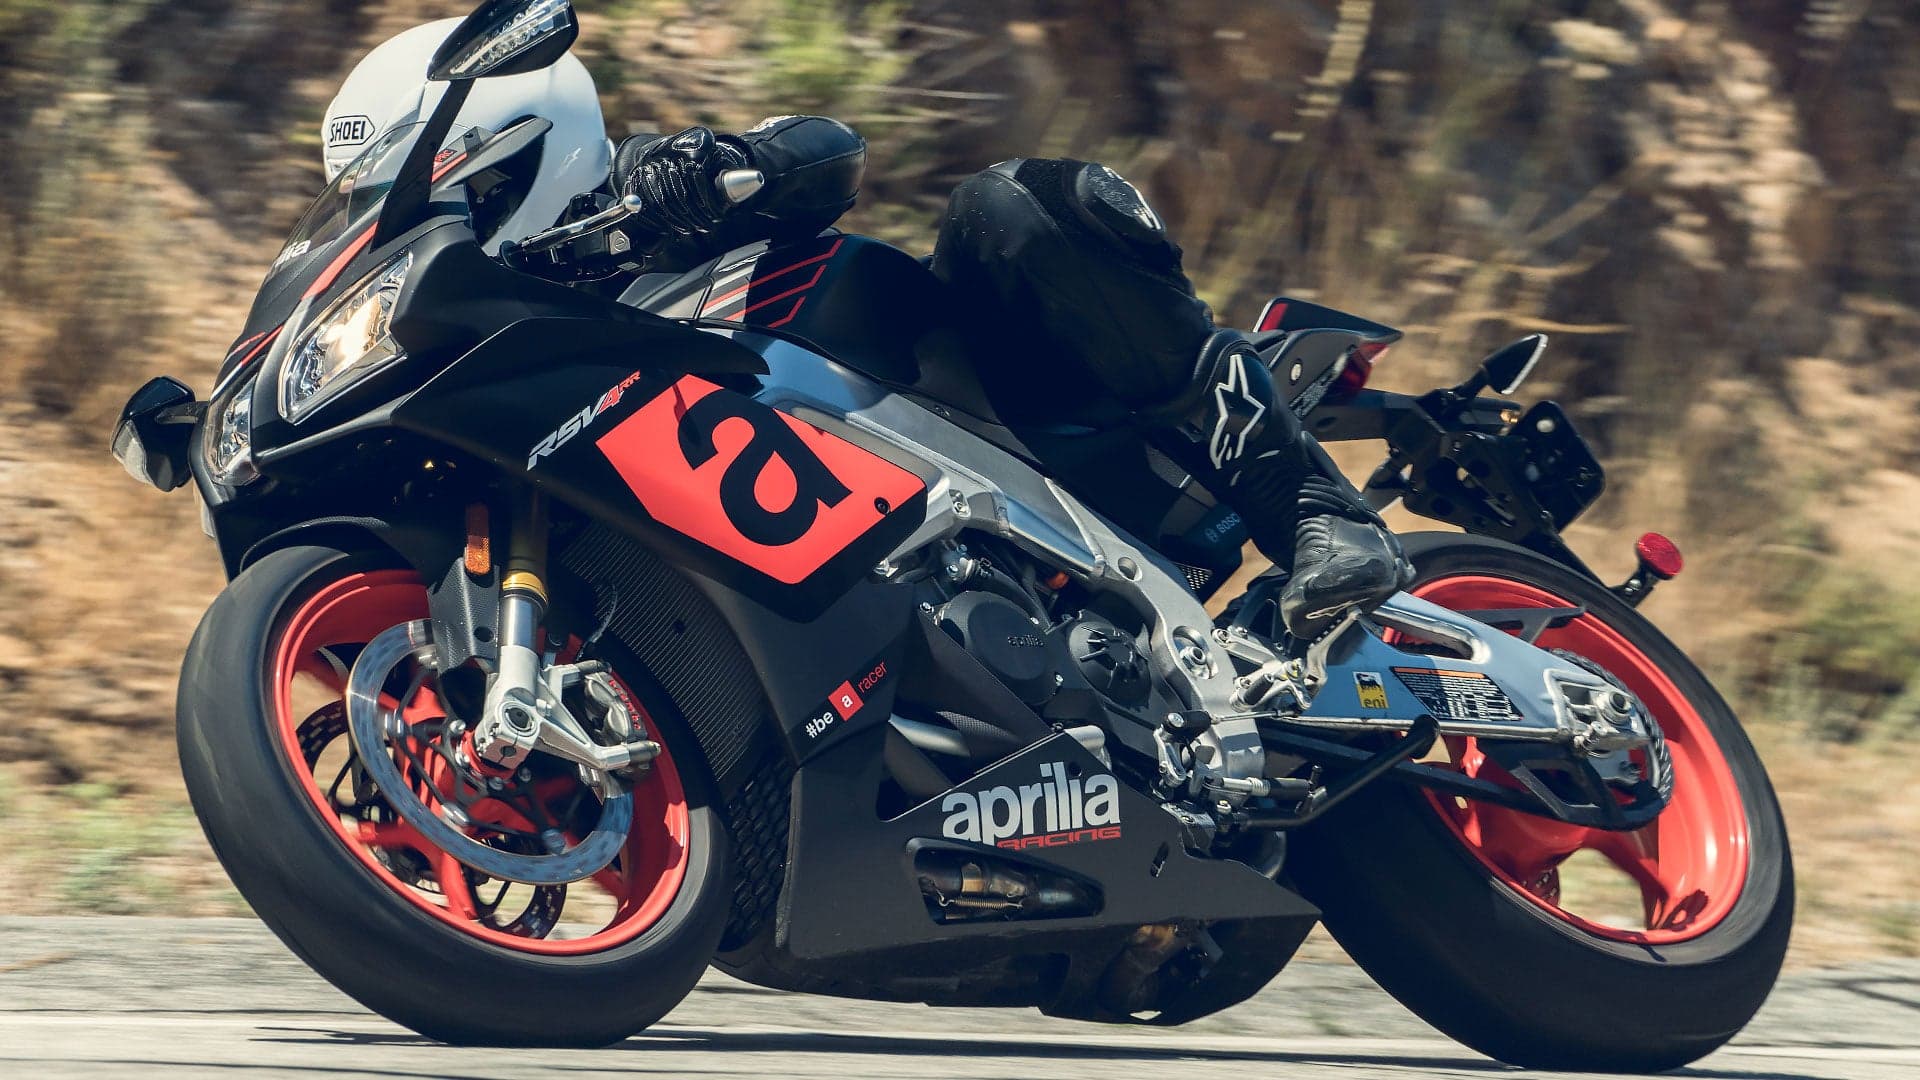 You Can’t Out-Fun the Aprilia RSV4 RR at Any Price